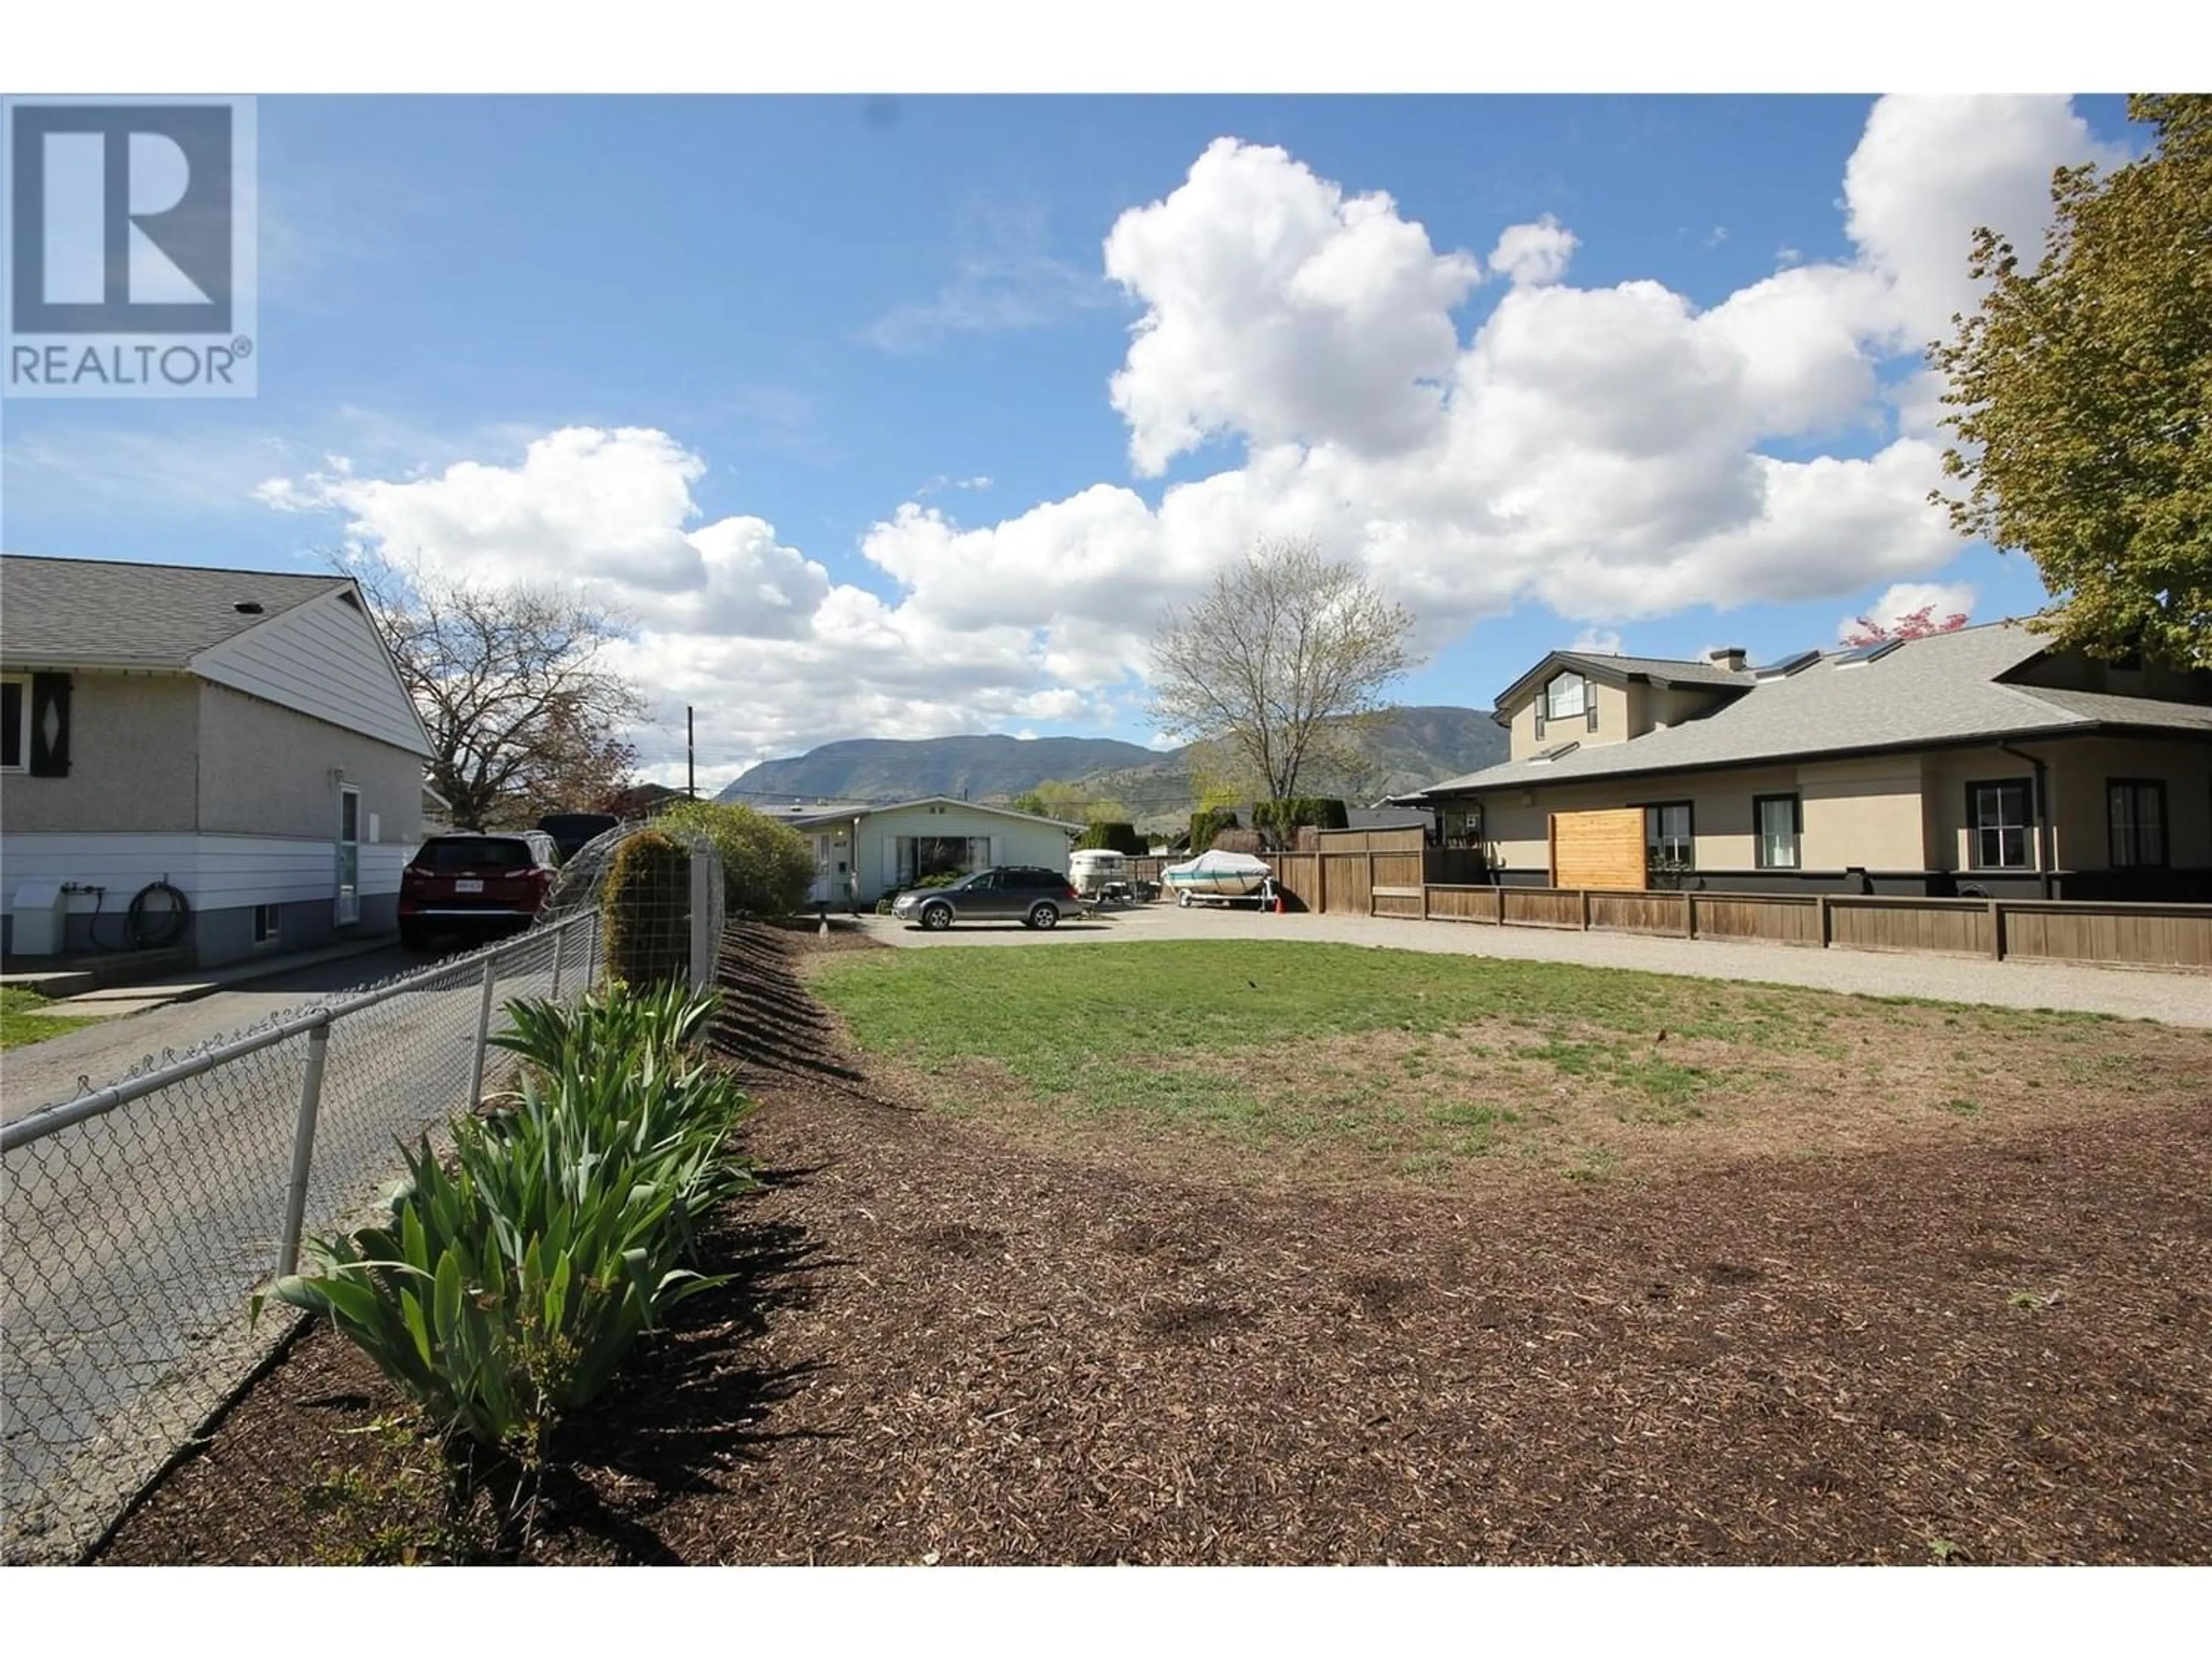 Frontside or backside of a home for 402 CONKLIN Avenue, Penticton British Columbia V2A2T4